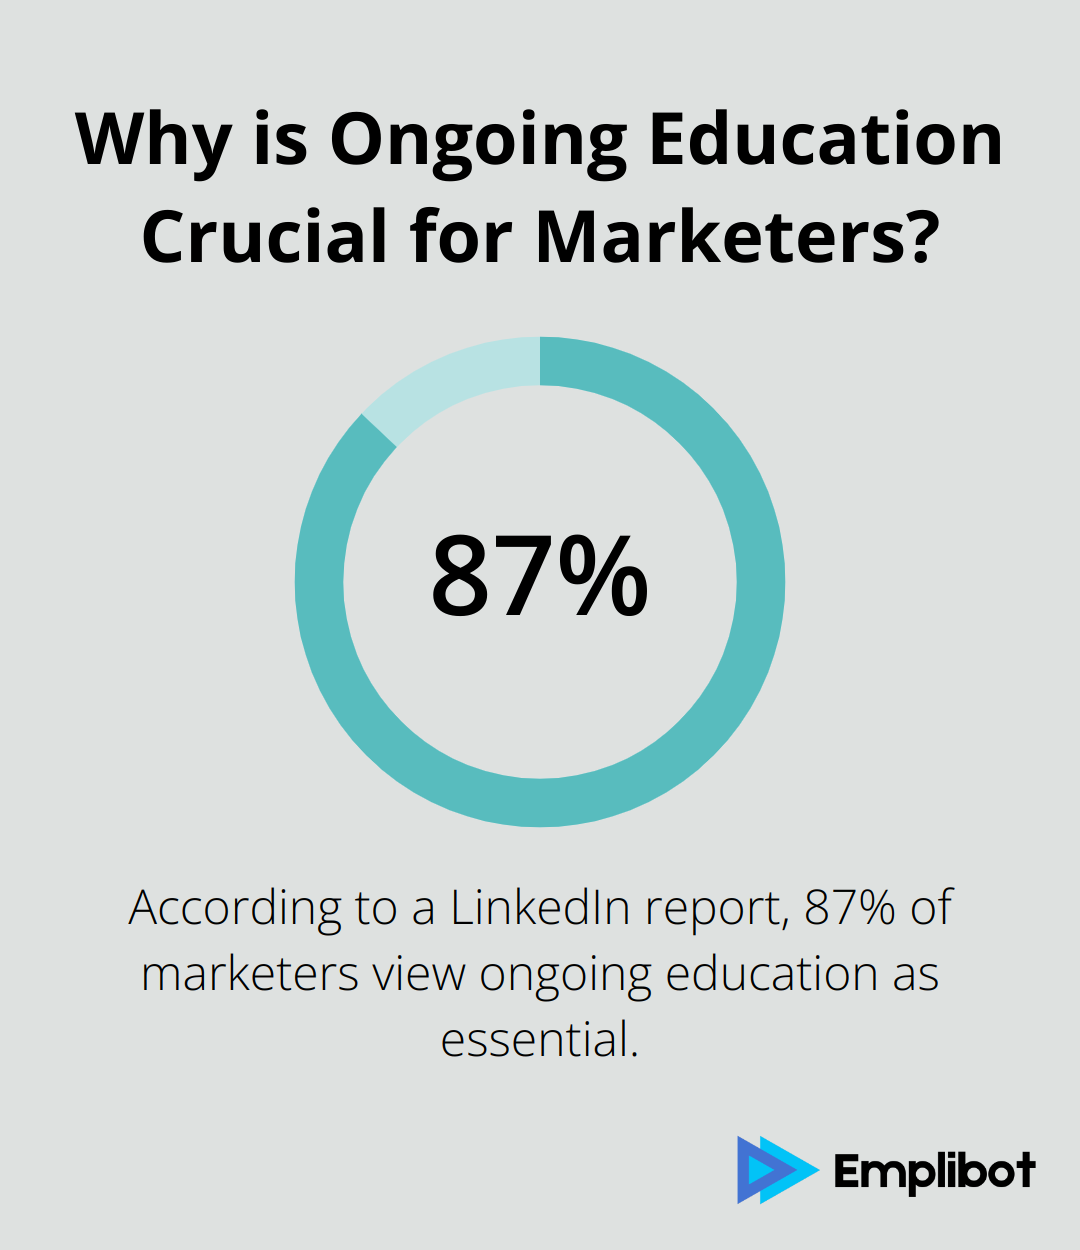 Why is Ongoing Education Crucial for Marketers?